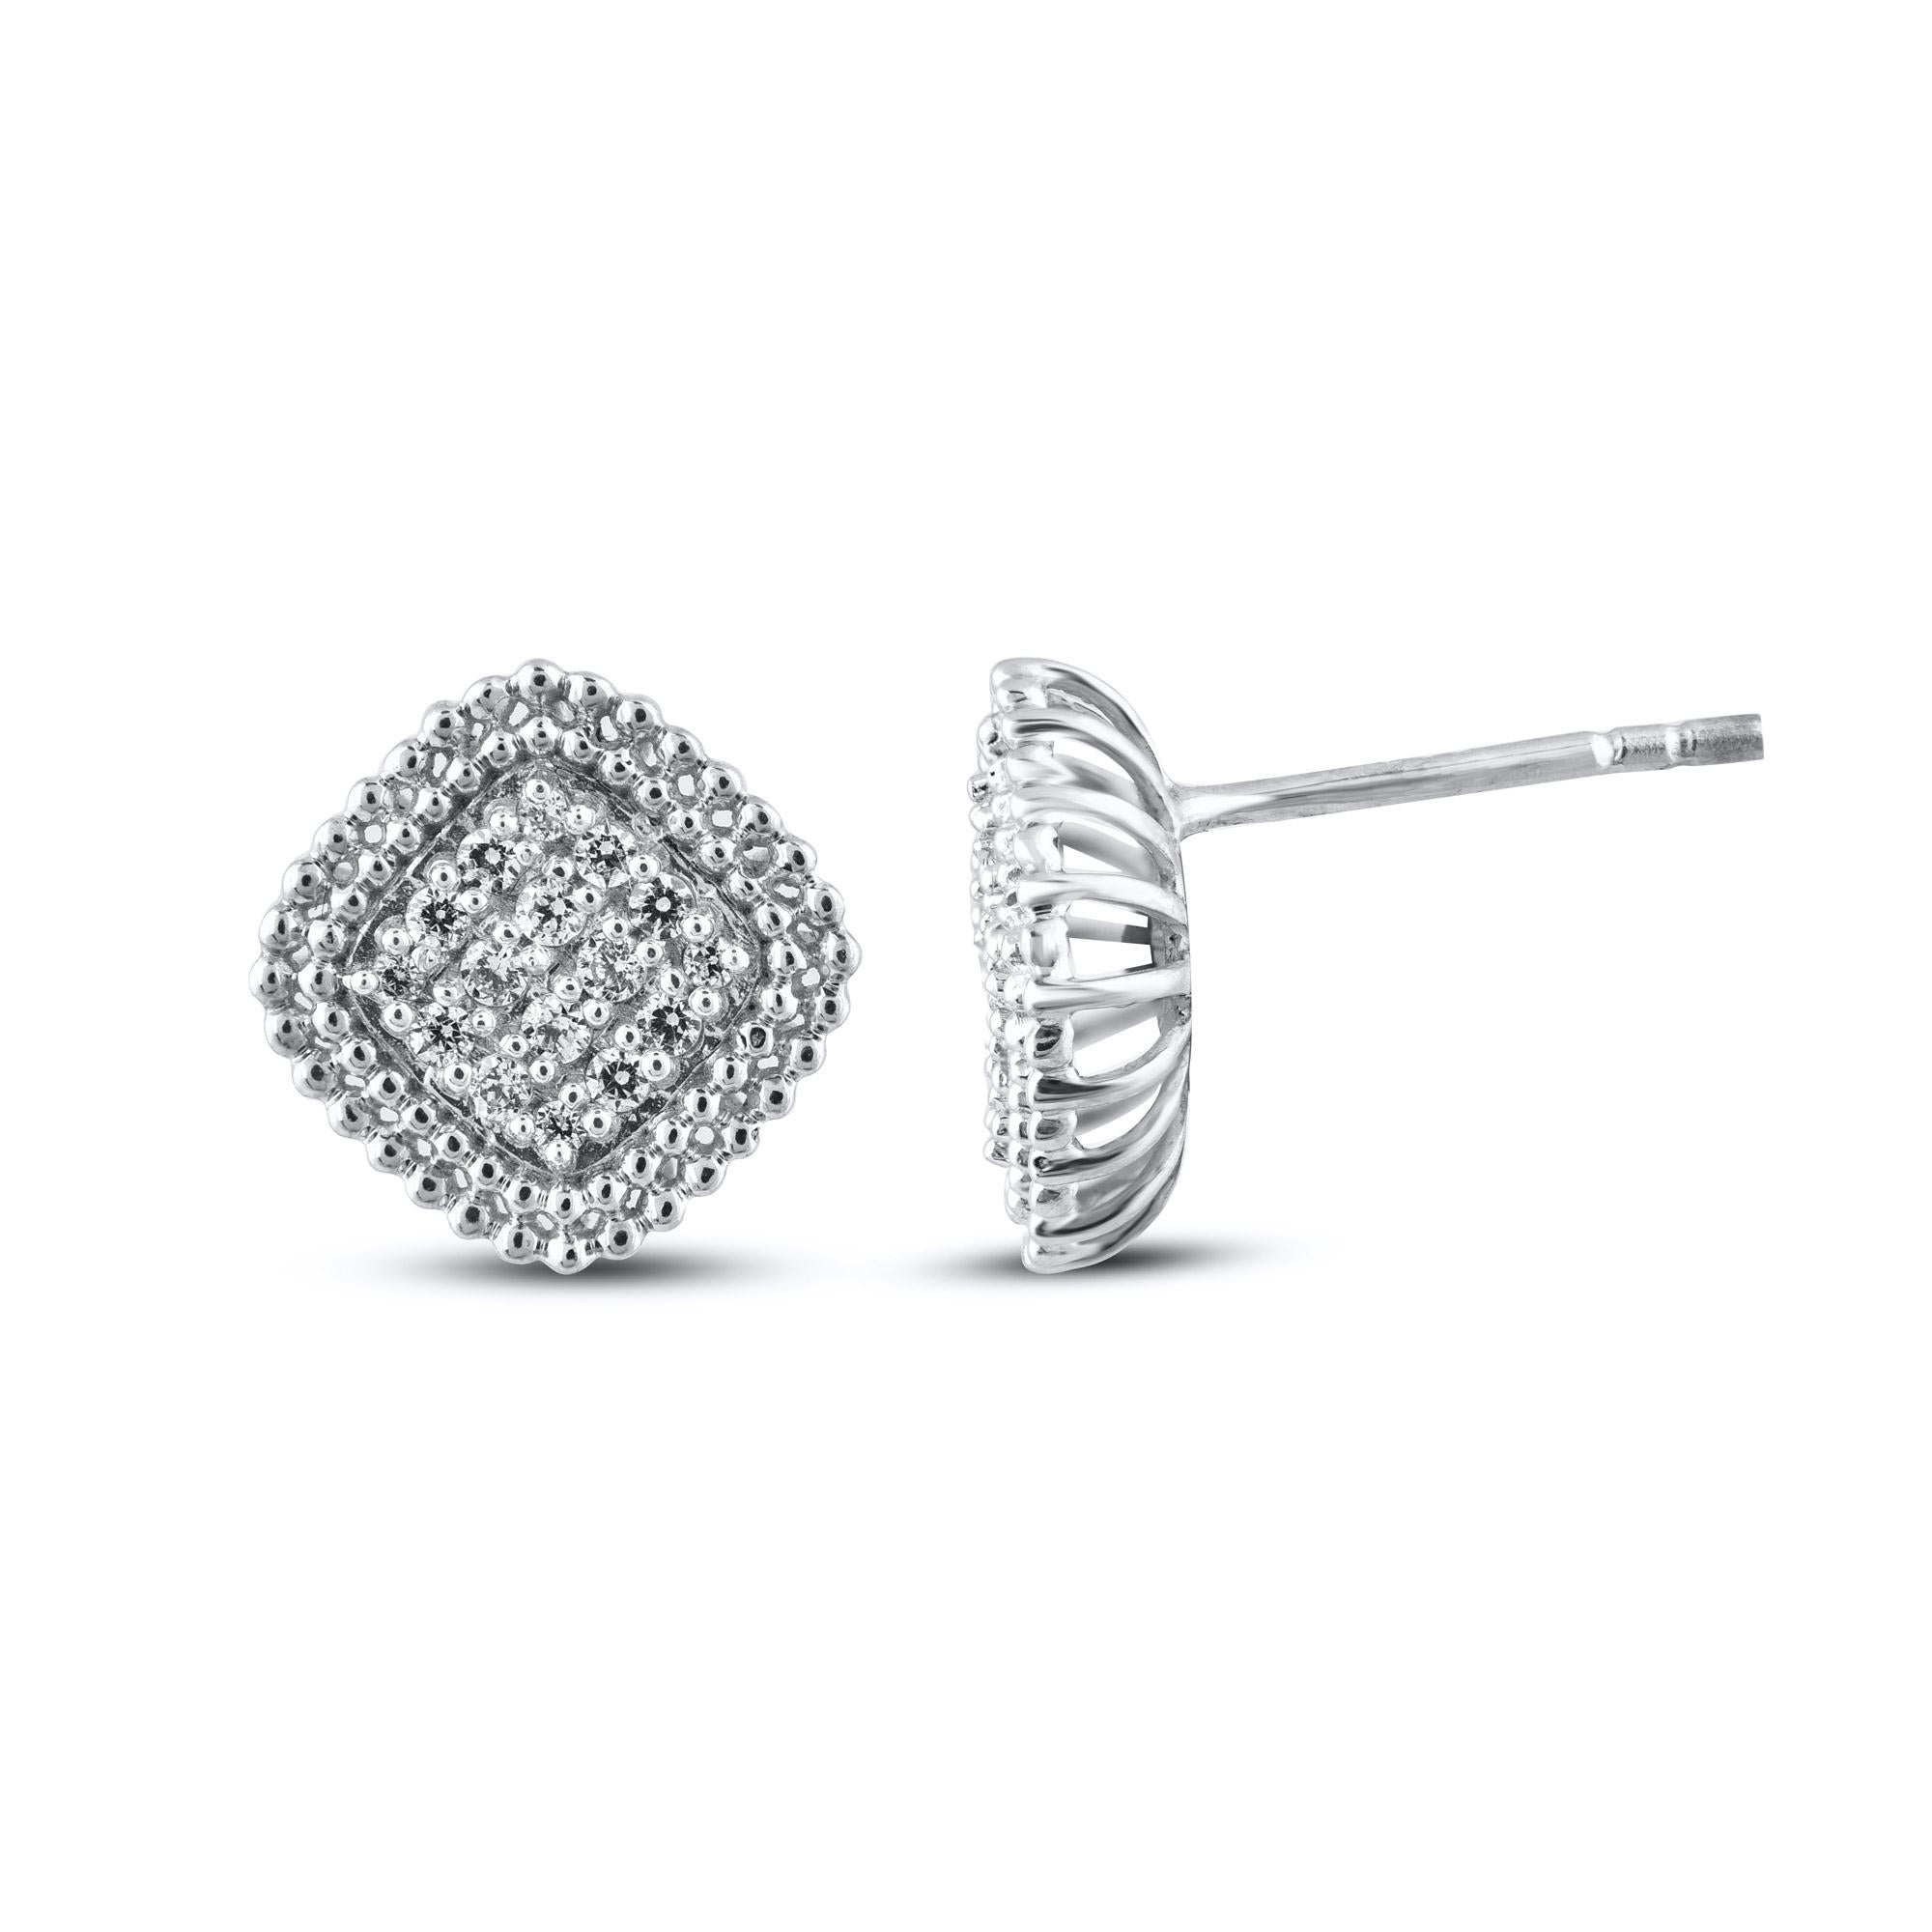 Timeless and elegant, these diamond stud earrings go from day to night with ease. This earring is beautifully designed and studded with 32 single cut and brilliant cut diamond in prong setting. The total diamond weight is 0.25 carat. The diamonds